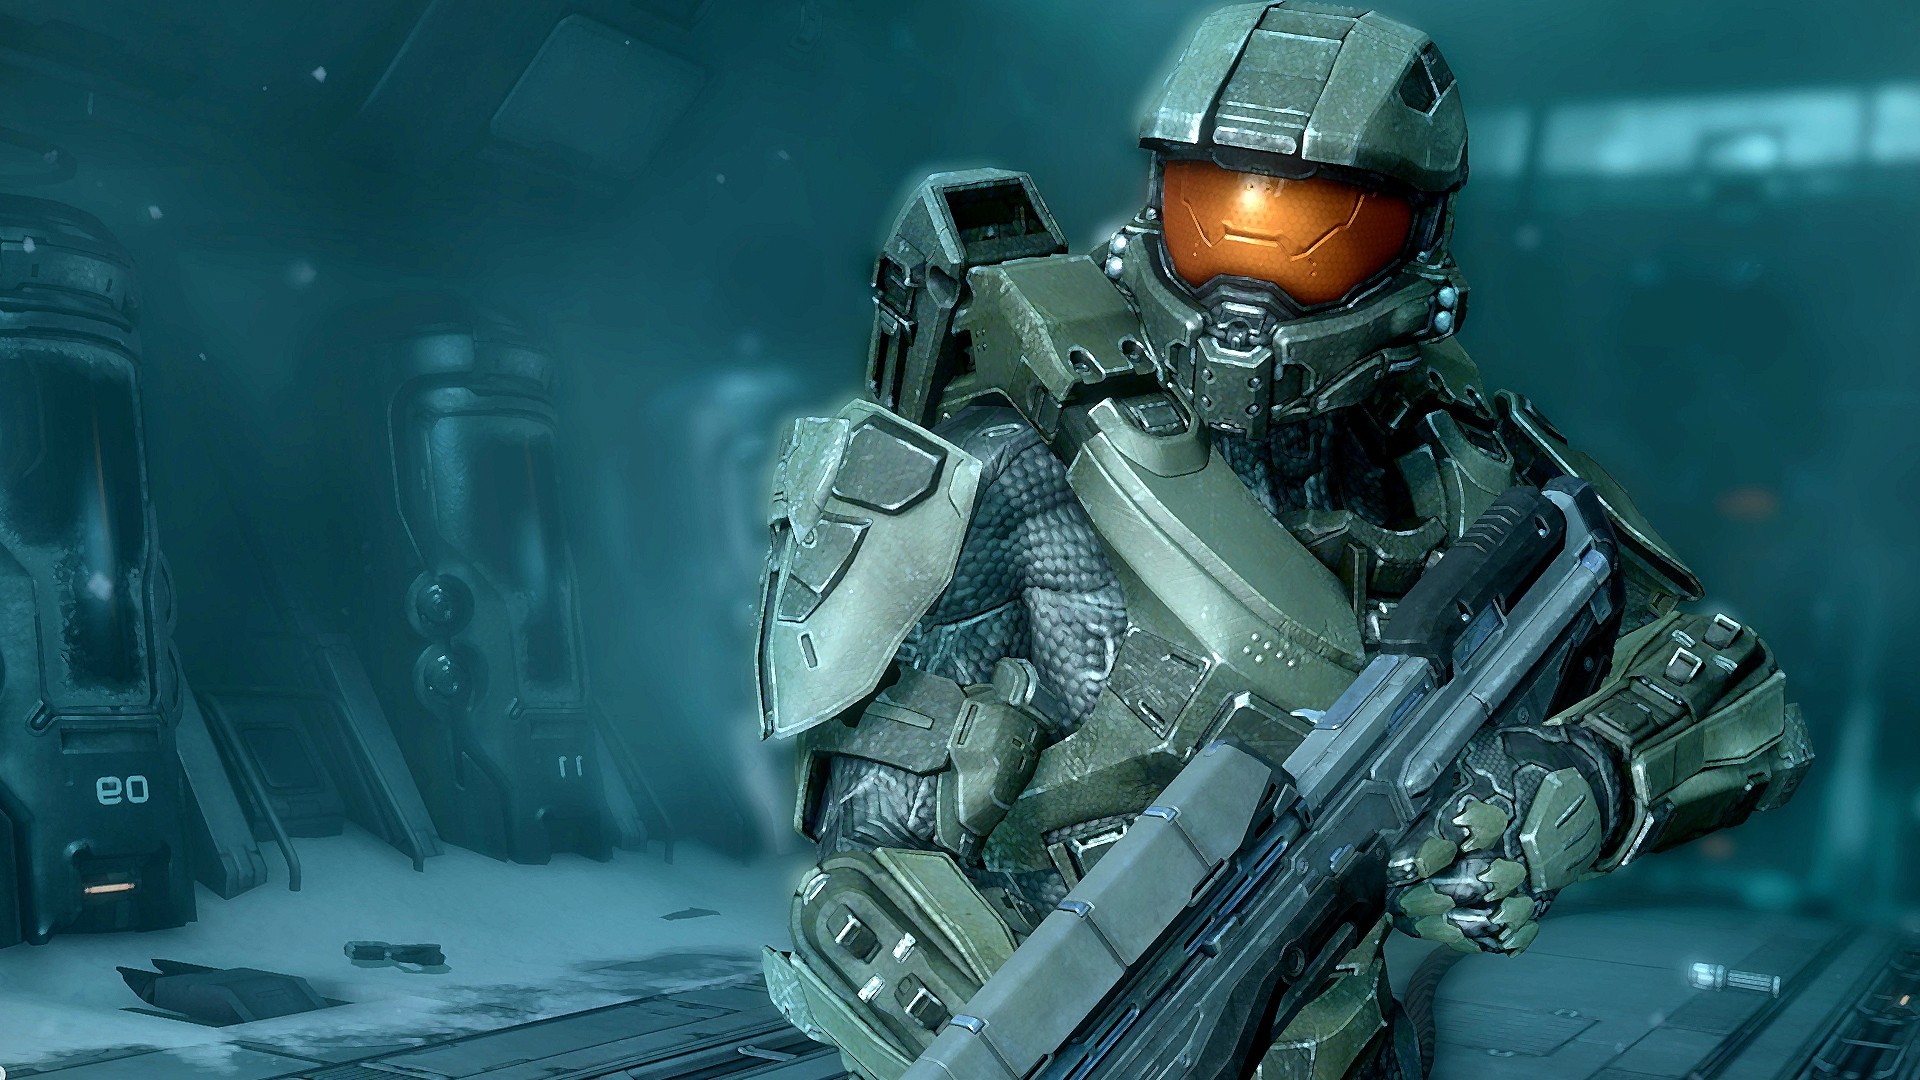 halo 4 pc game download full version